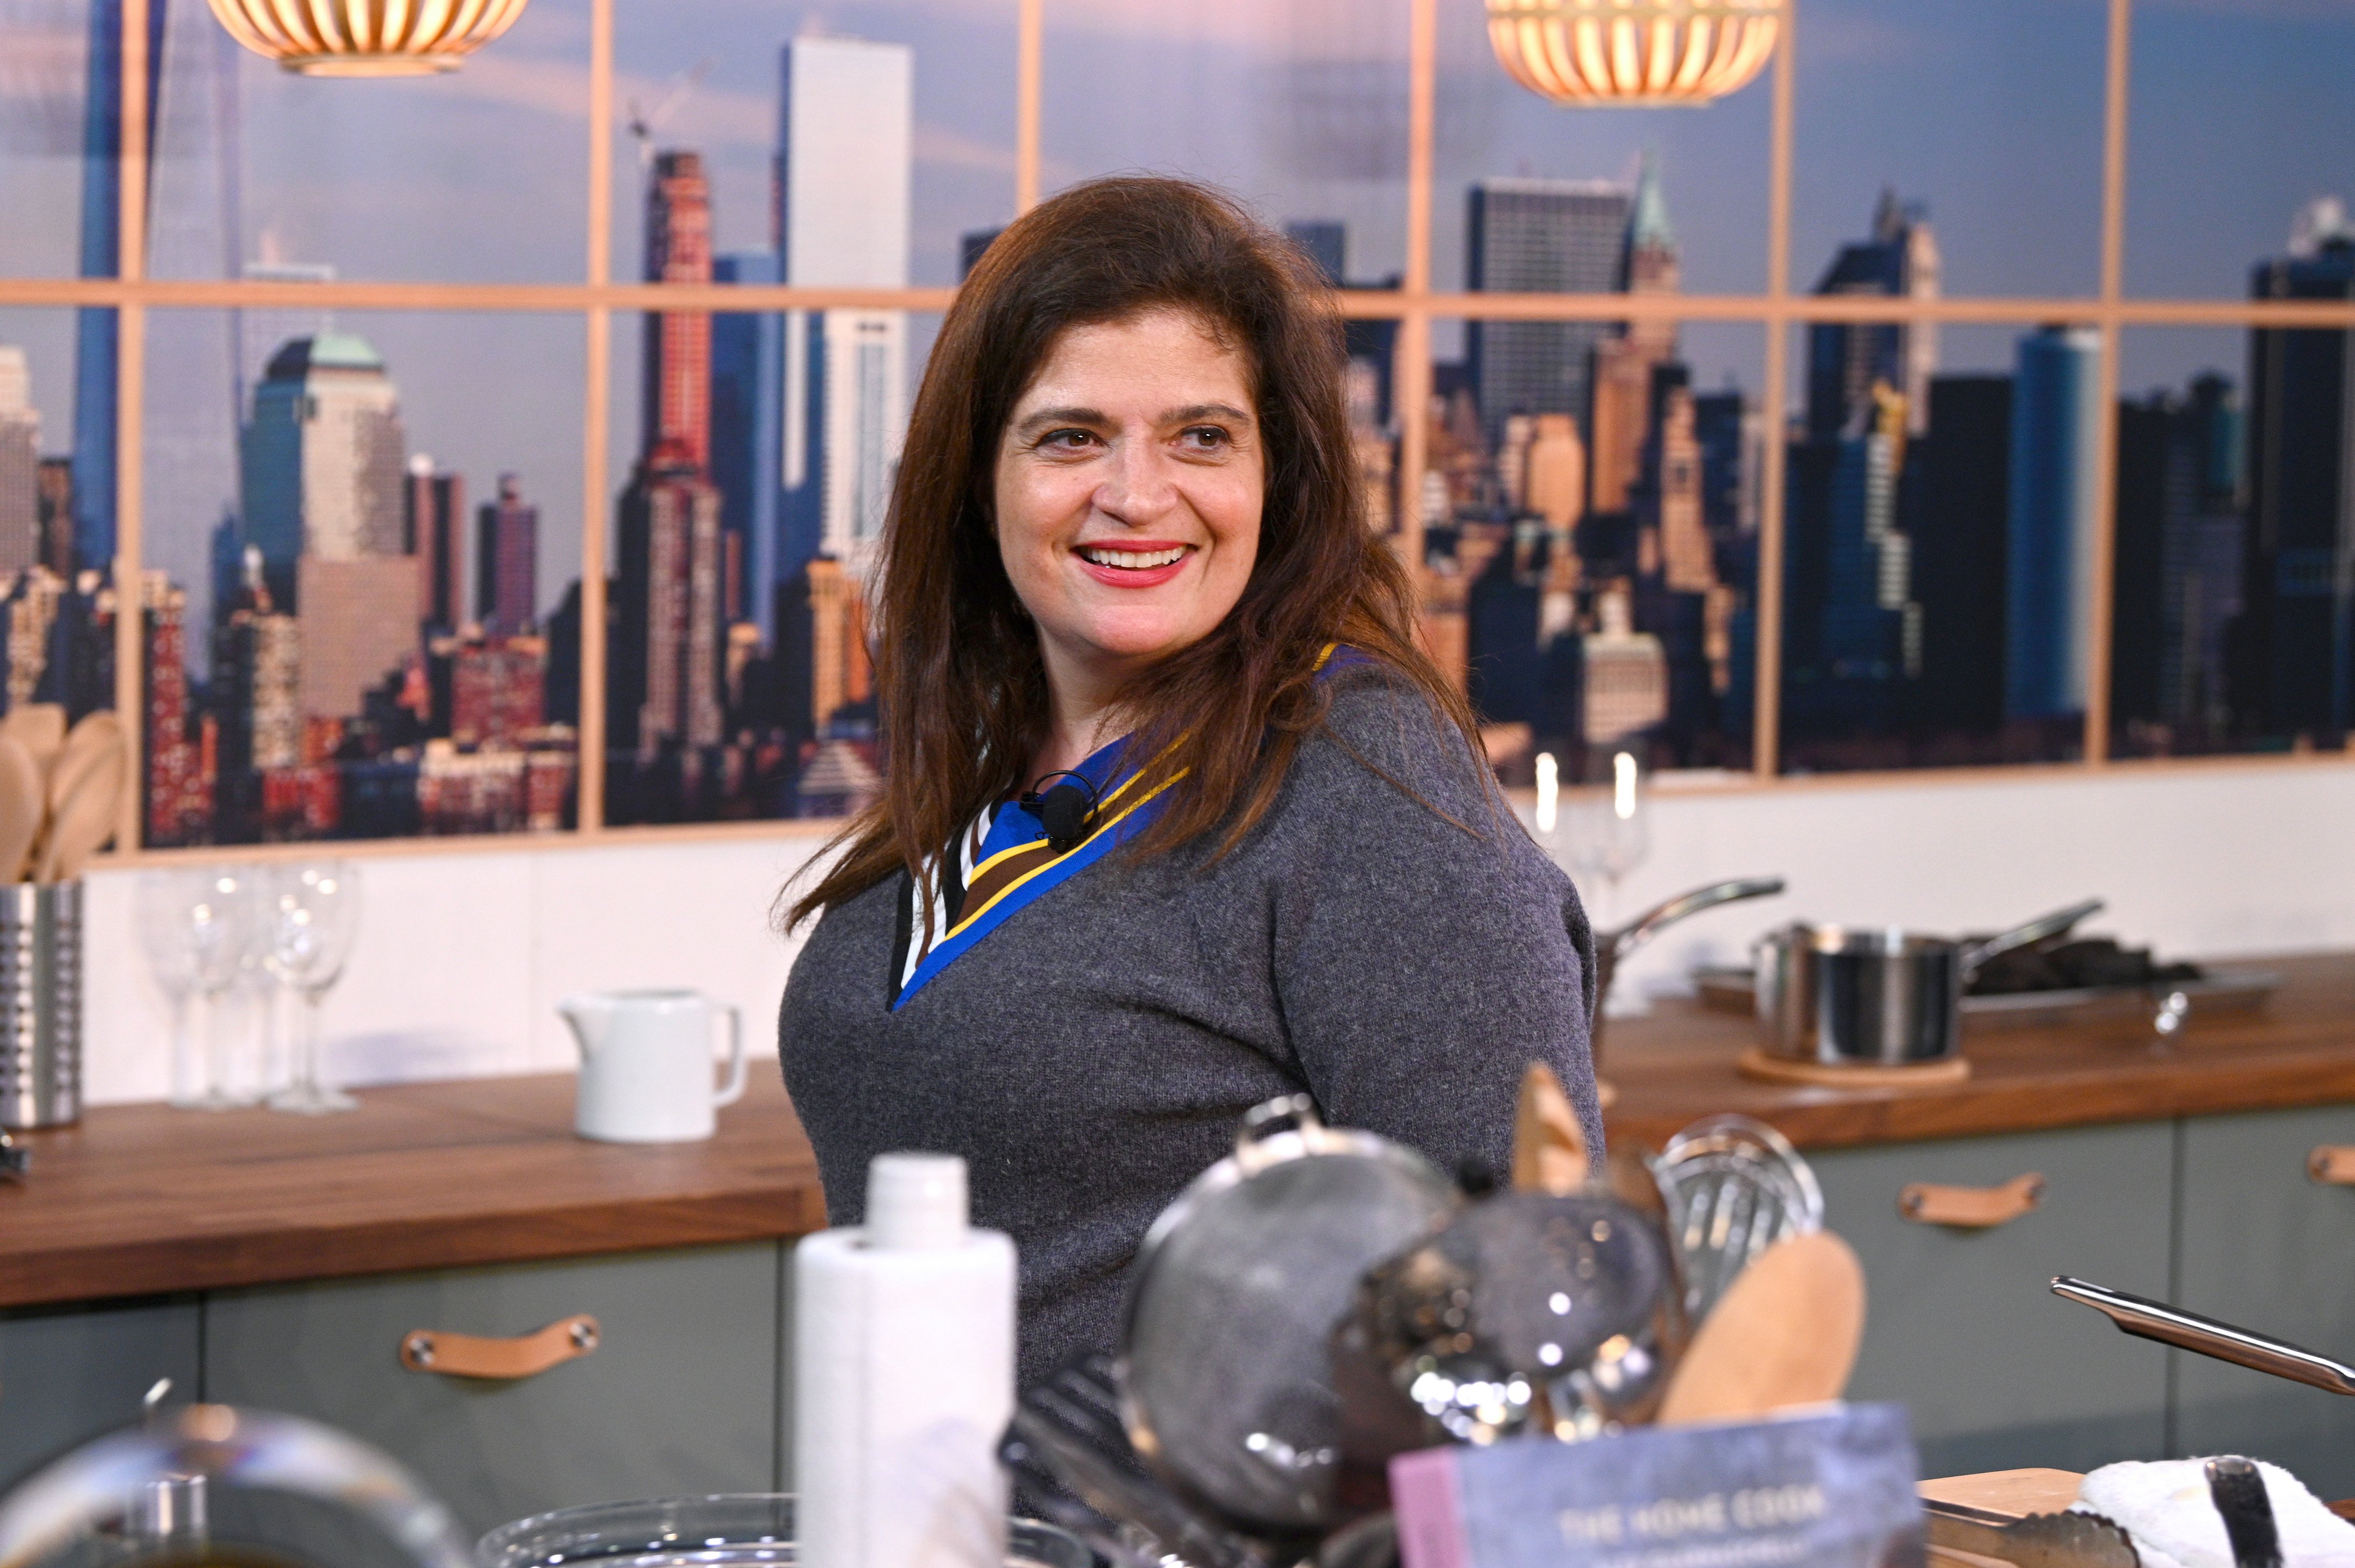 Food Network chef Alex Guarnaschelli wears a blue sweater as she prepares a dish.